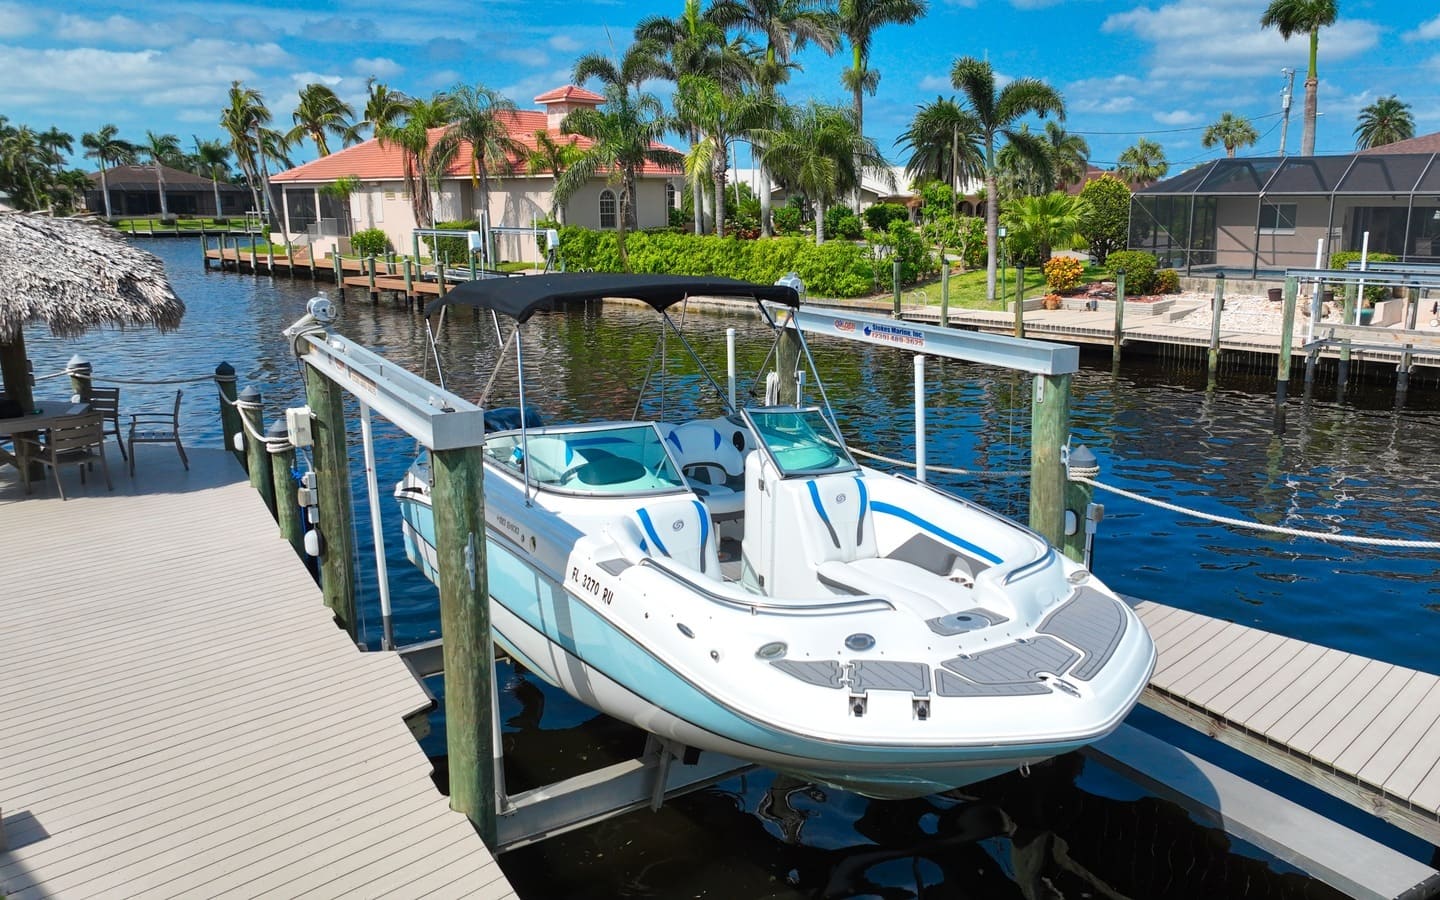 24 Foot Hurricane Deck Boat - Picture of Anchors Away Boat Rentals